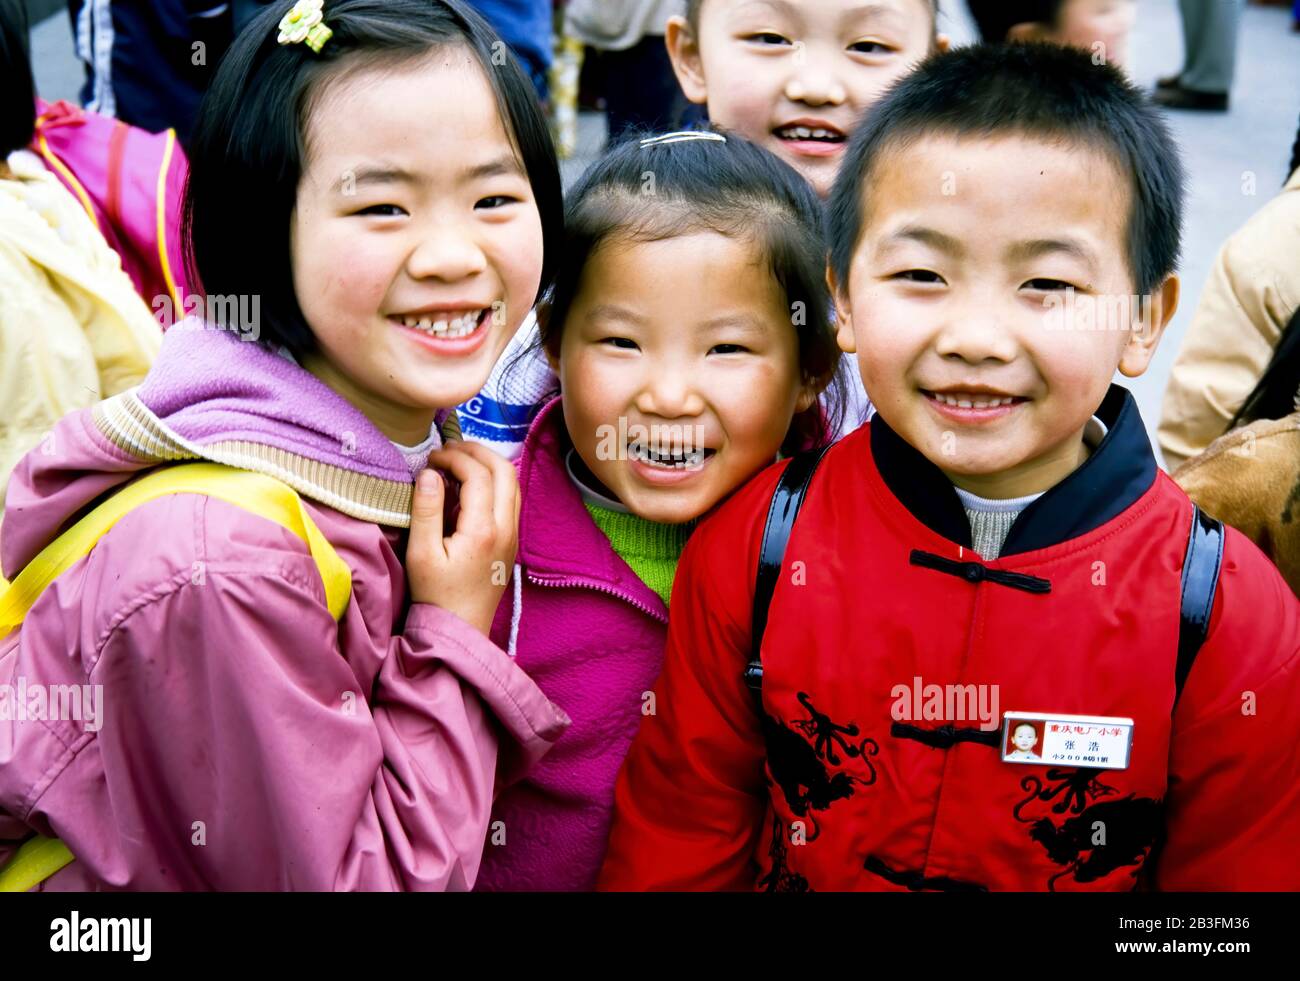 Chongqing China , March 2005 - Young Chinese students posing for a group photo at a school outing in Chongqing,China. Stock Photo